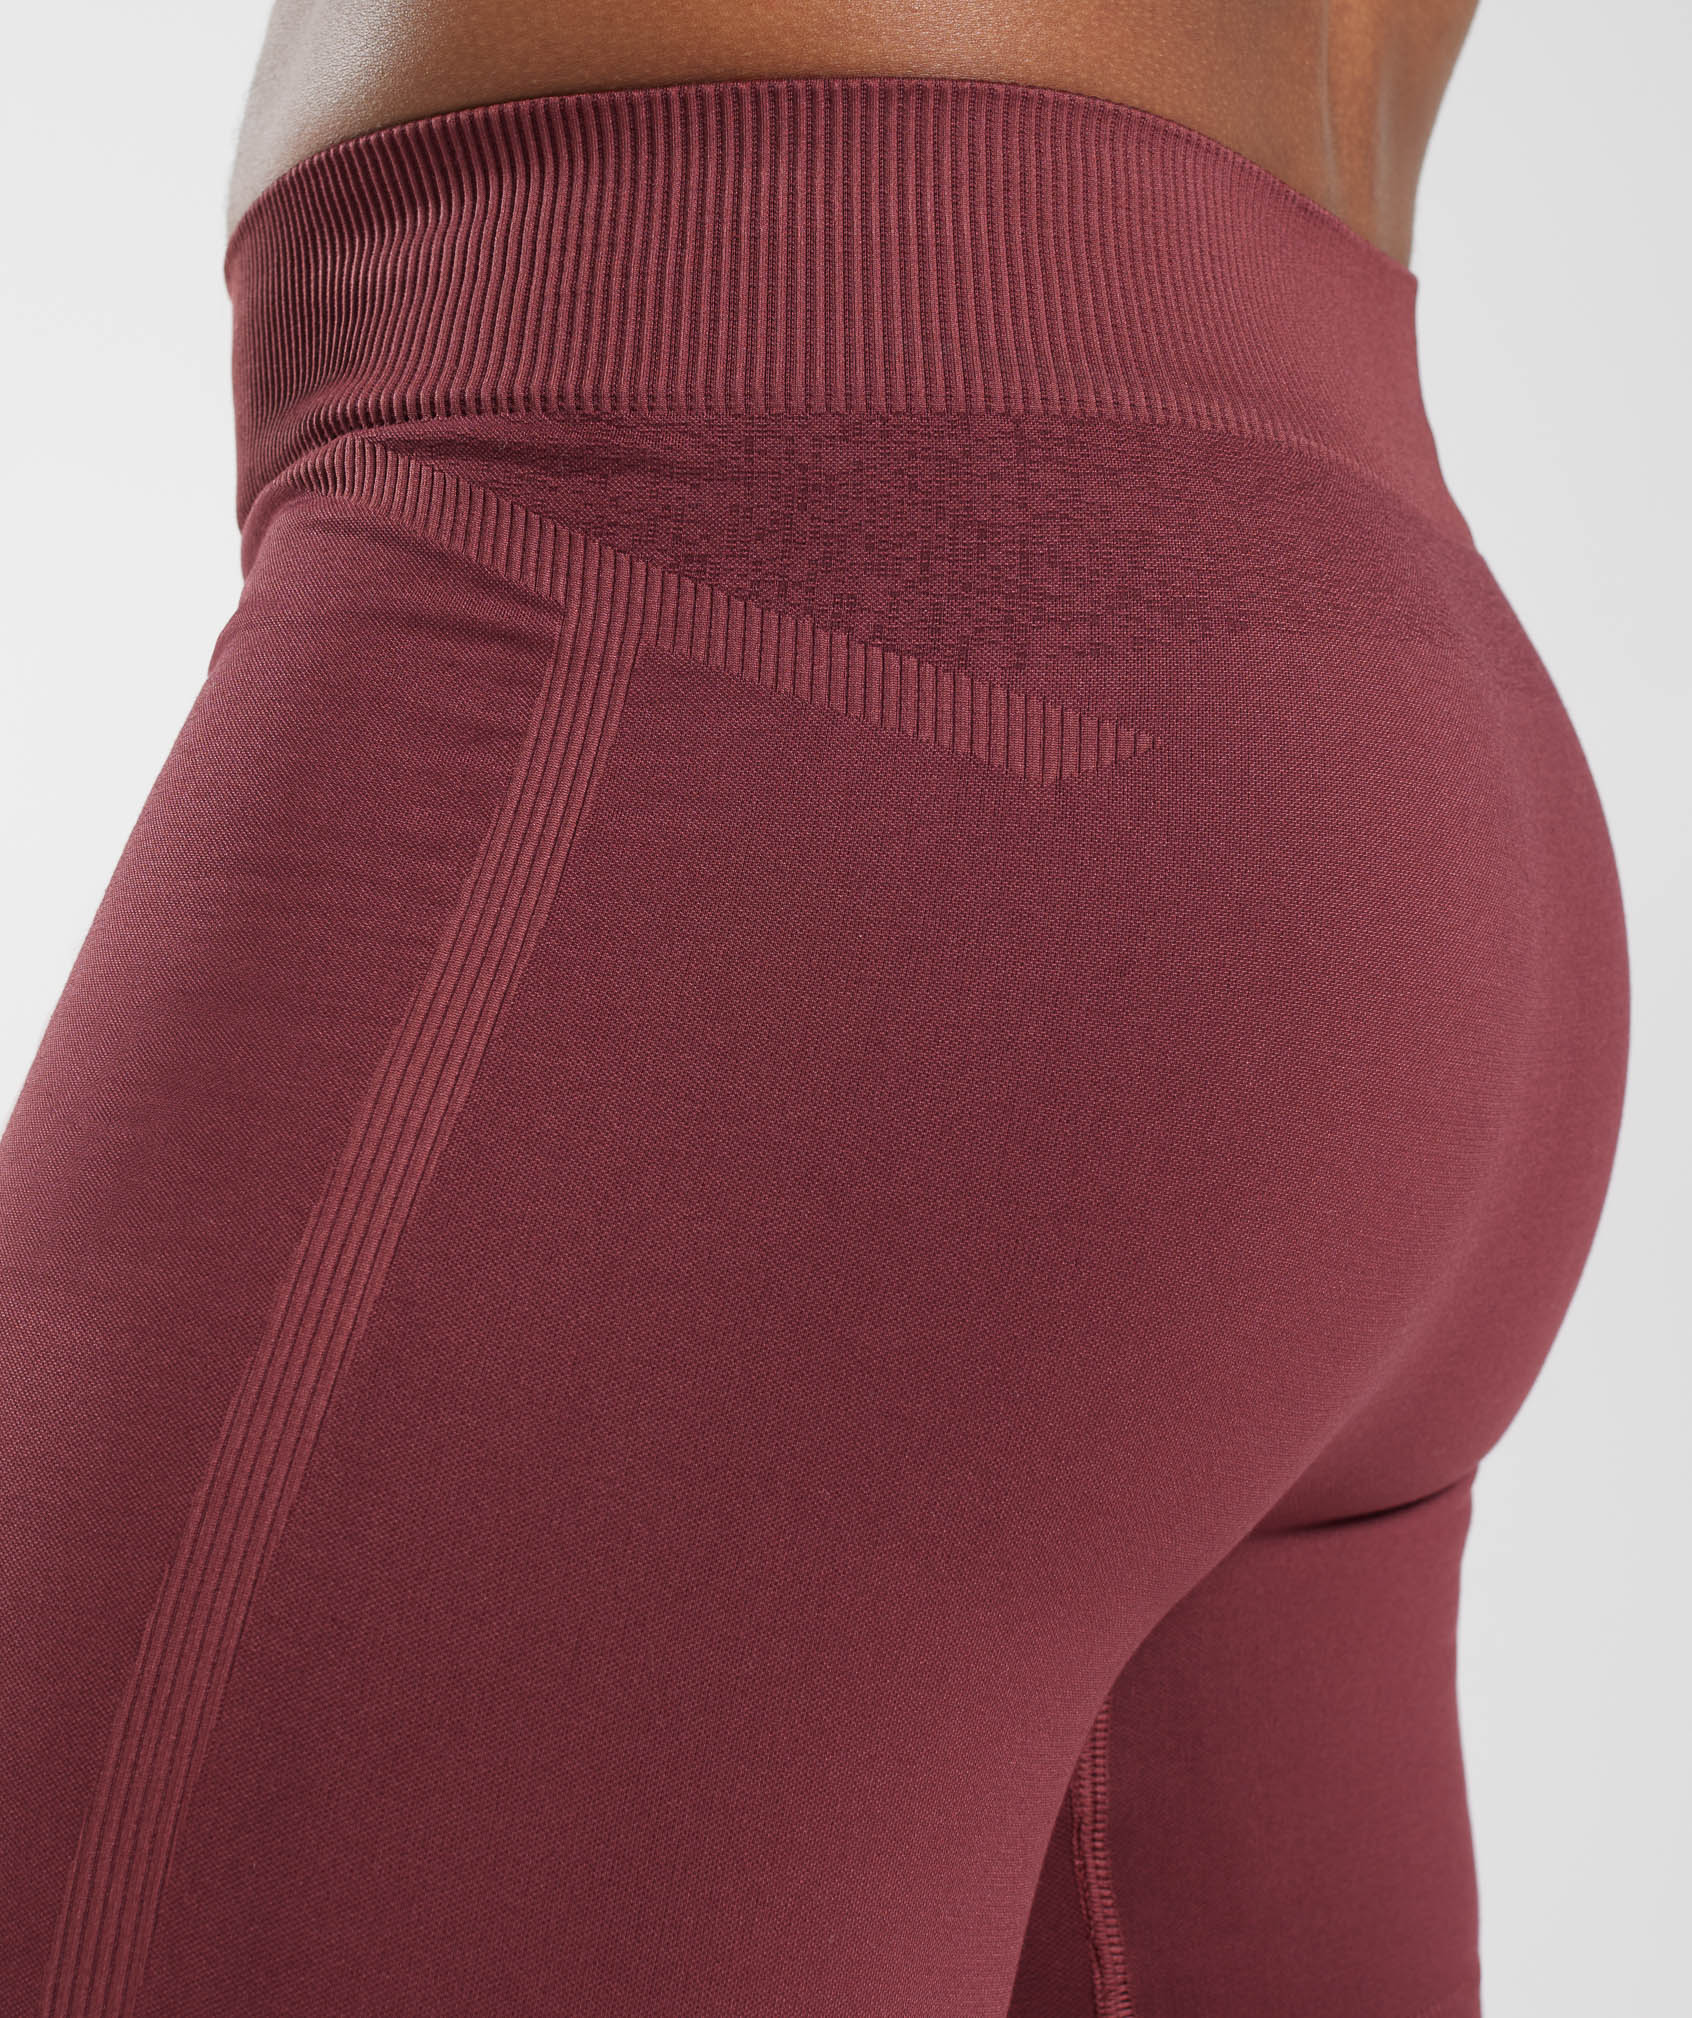 Running Seamless 7" Shorts in Cherry Brown - view 5